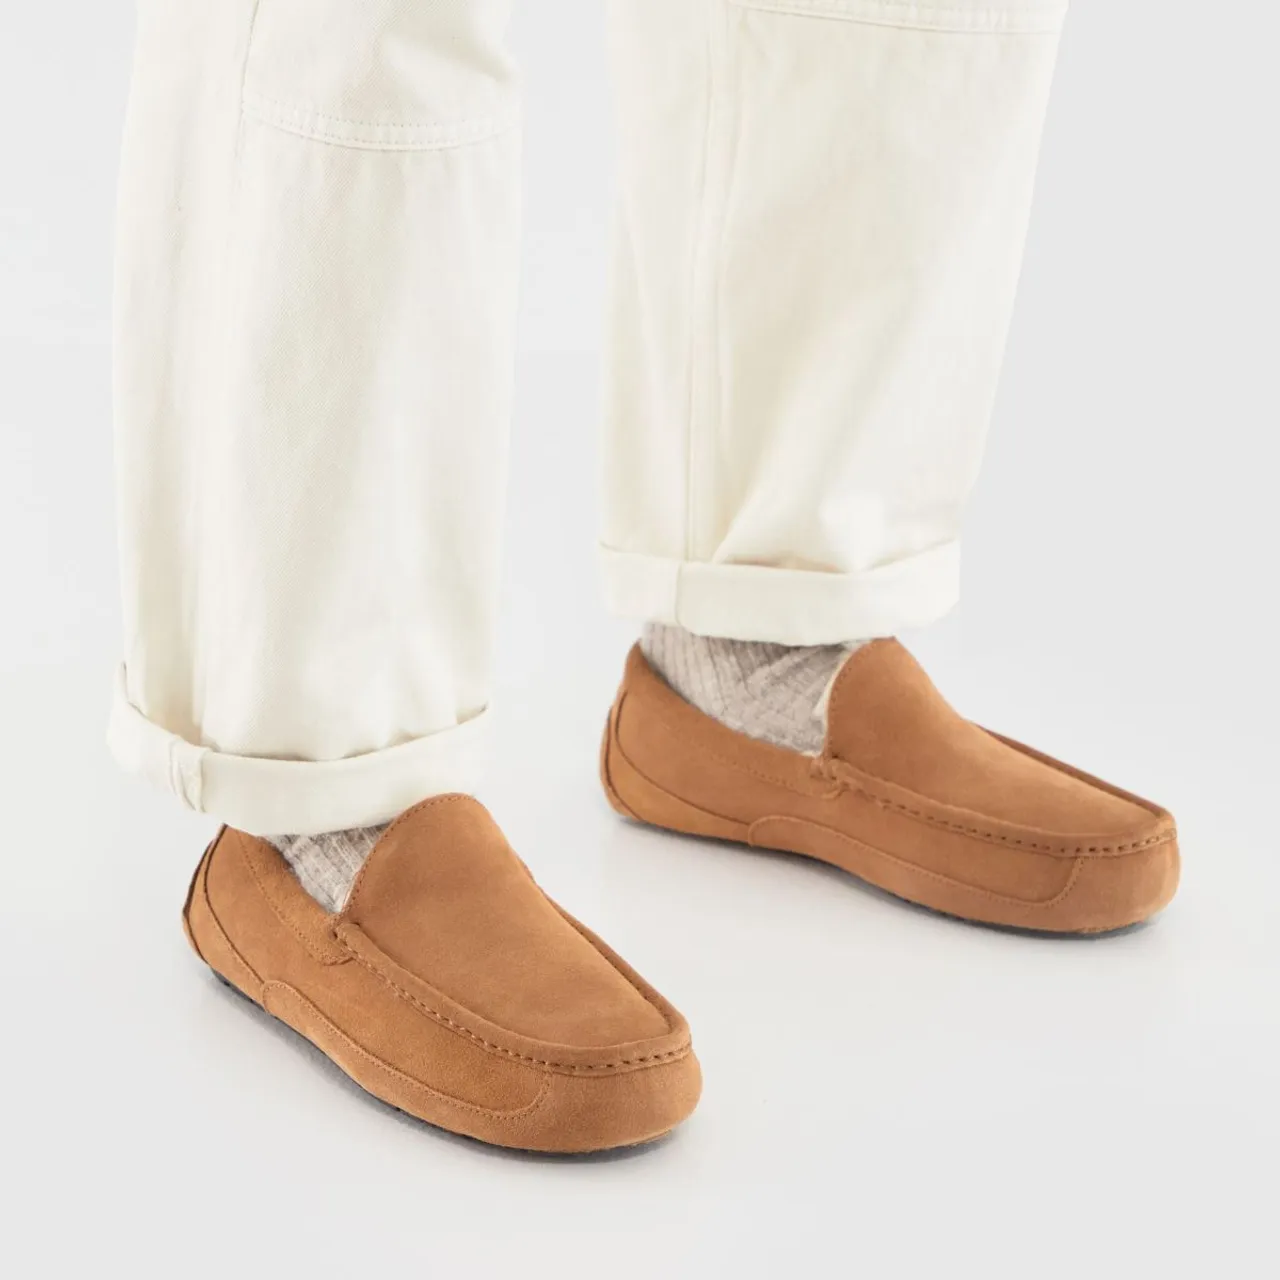 Ugg Ascot Slippers In Tan